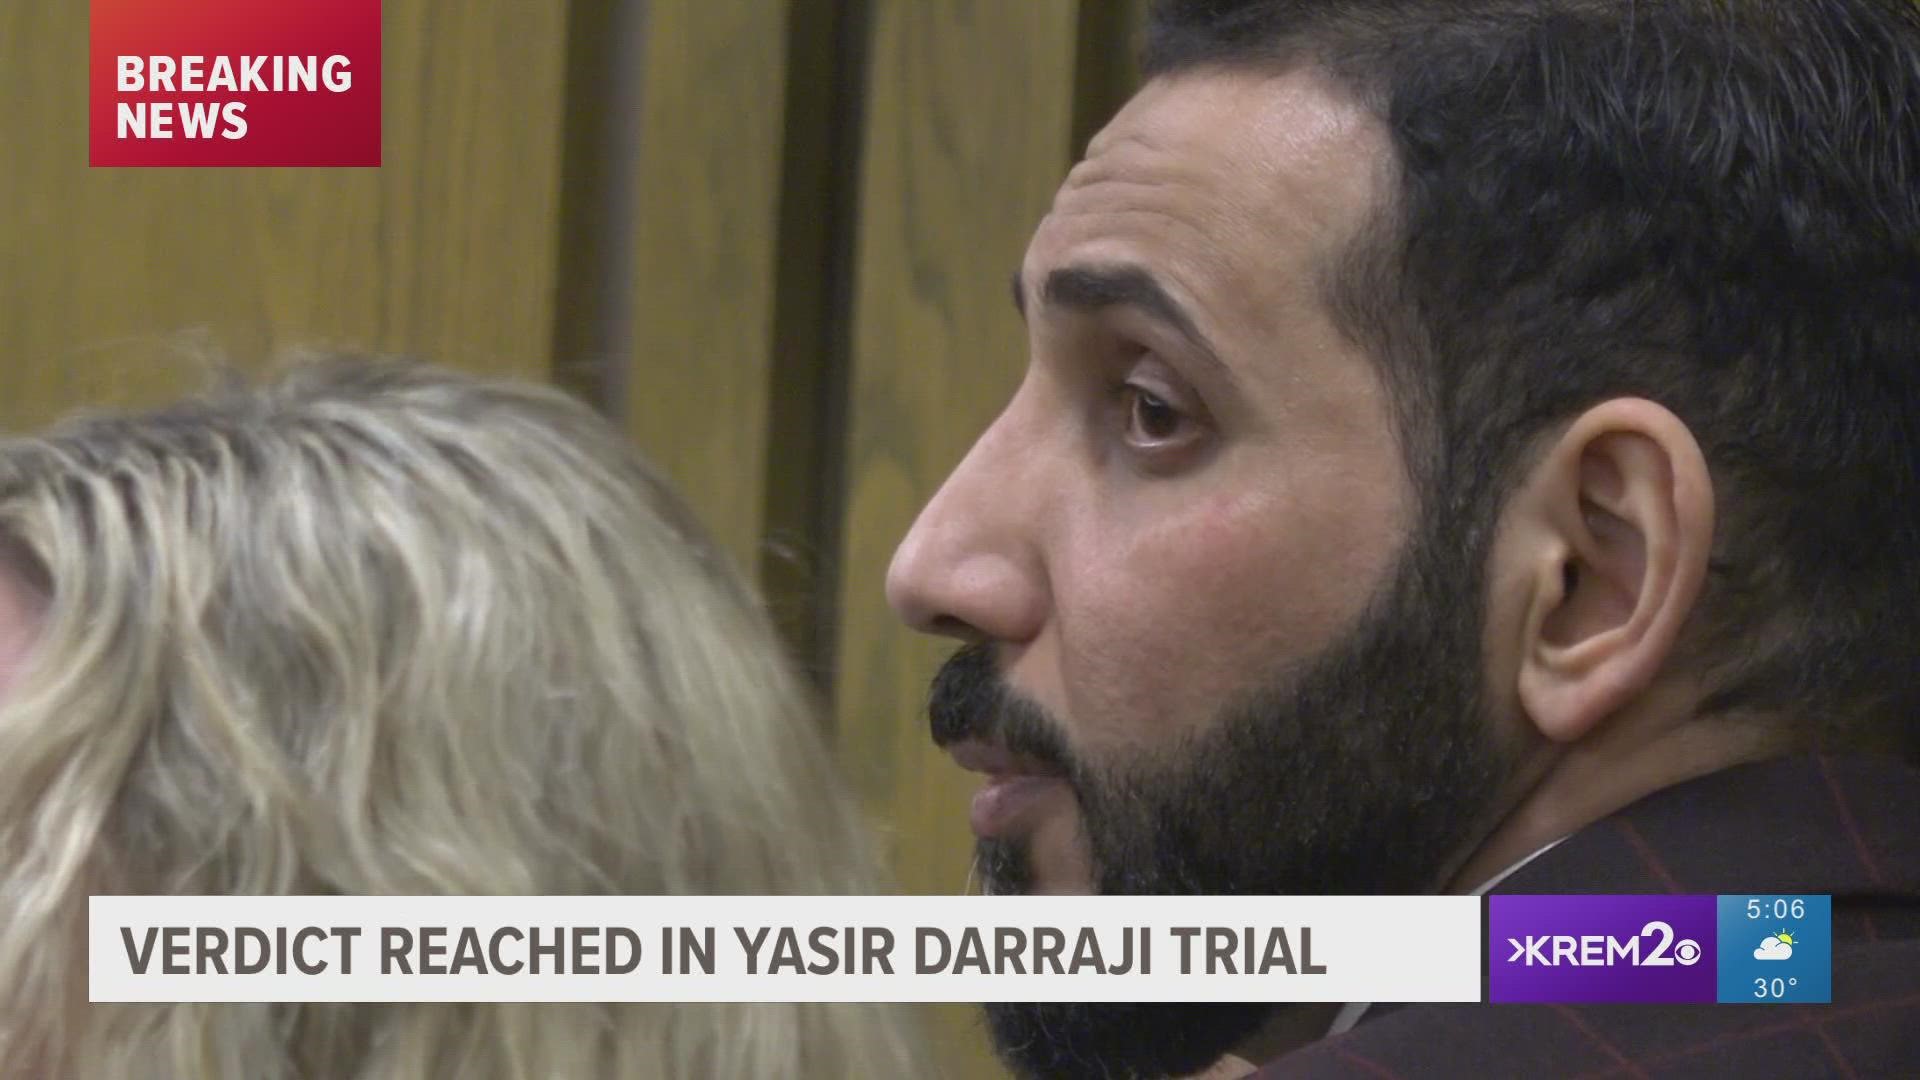 The jury spent Thursday afternoon and Monday morning deliberating before reaching a verdict.